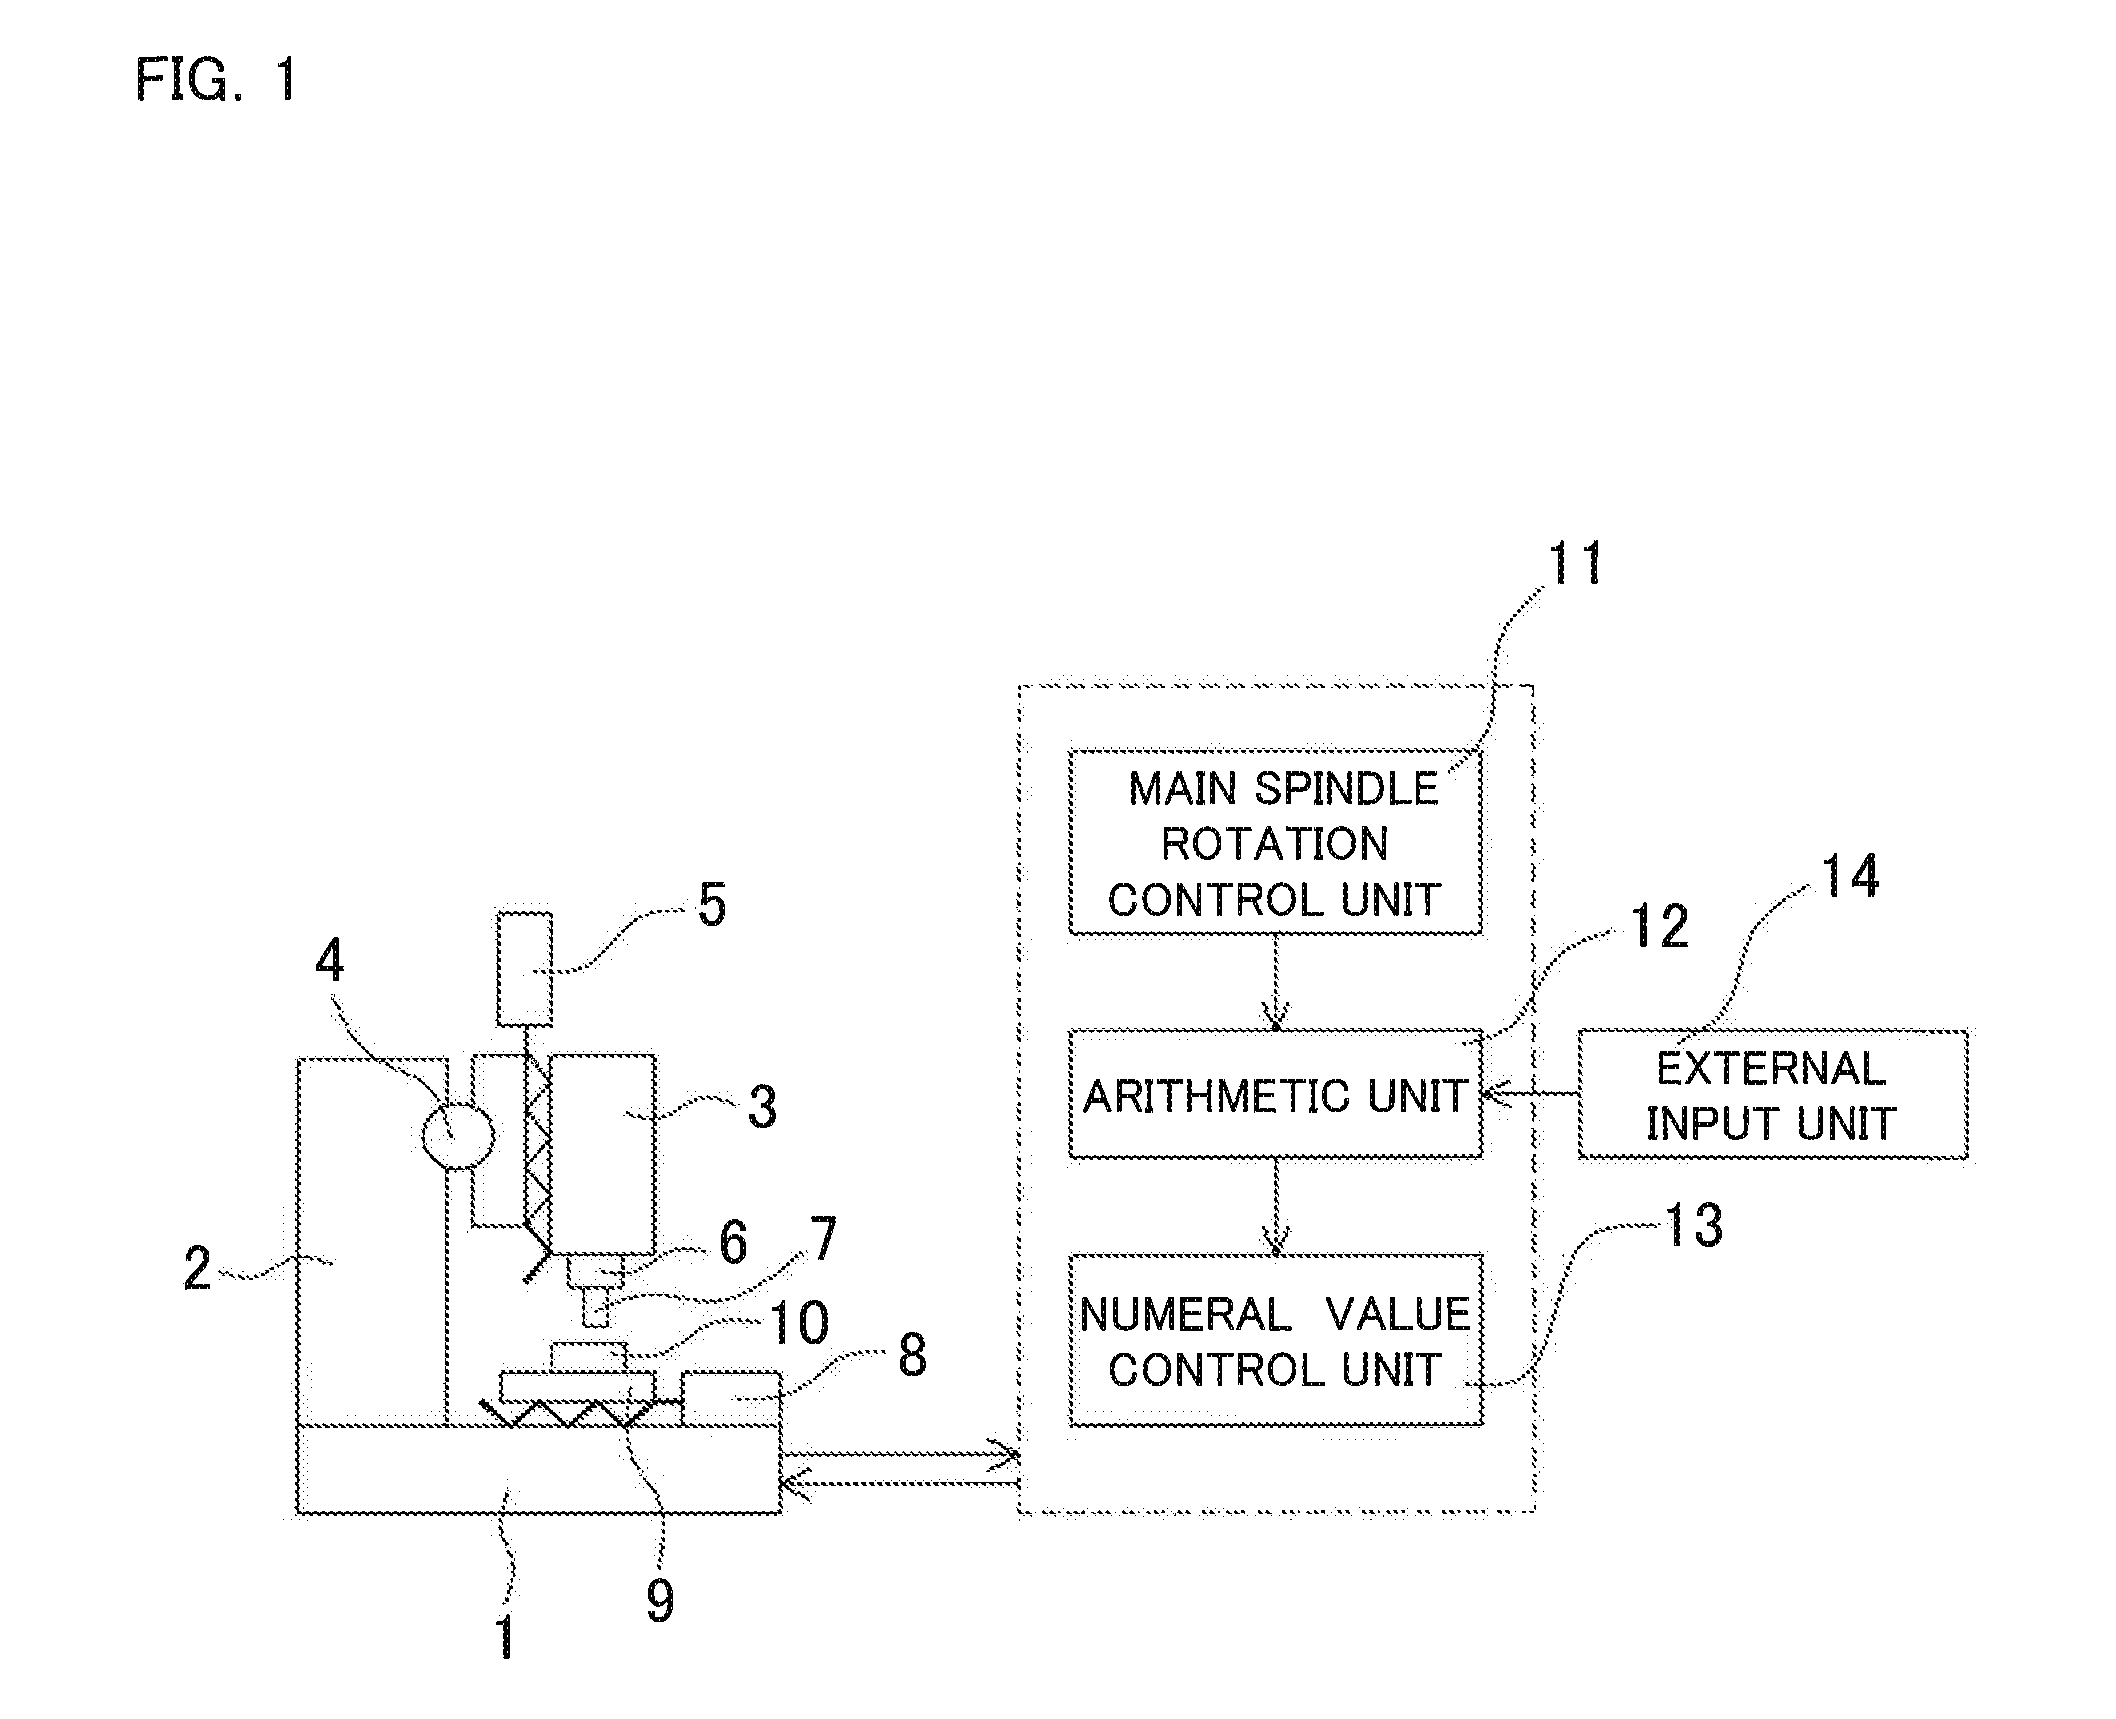 Method of controlling feed axes in machine tool, and machine tool performing machining by using the method of controlling feed axes